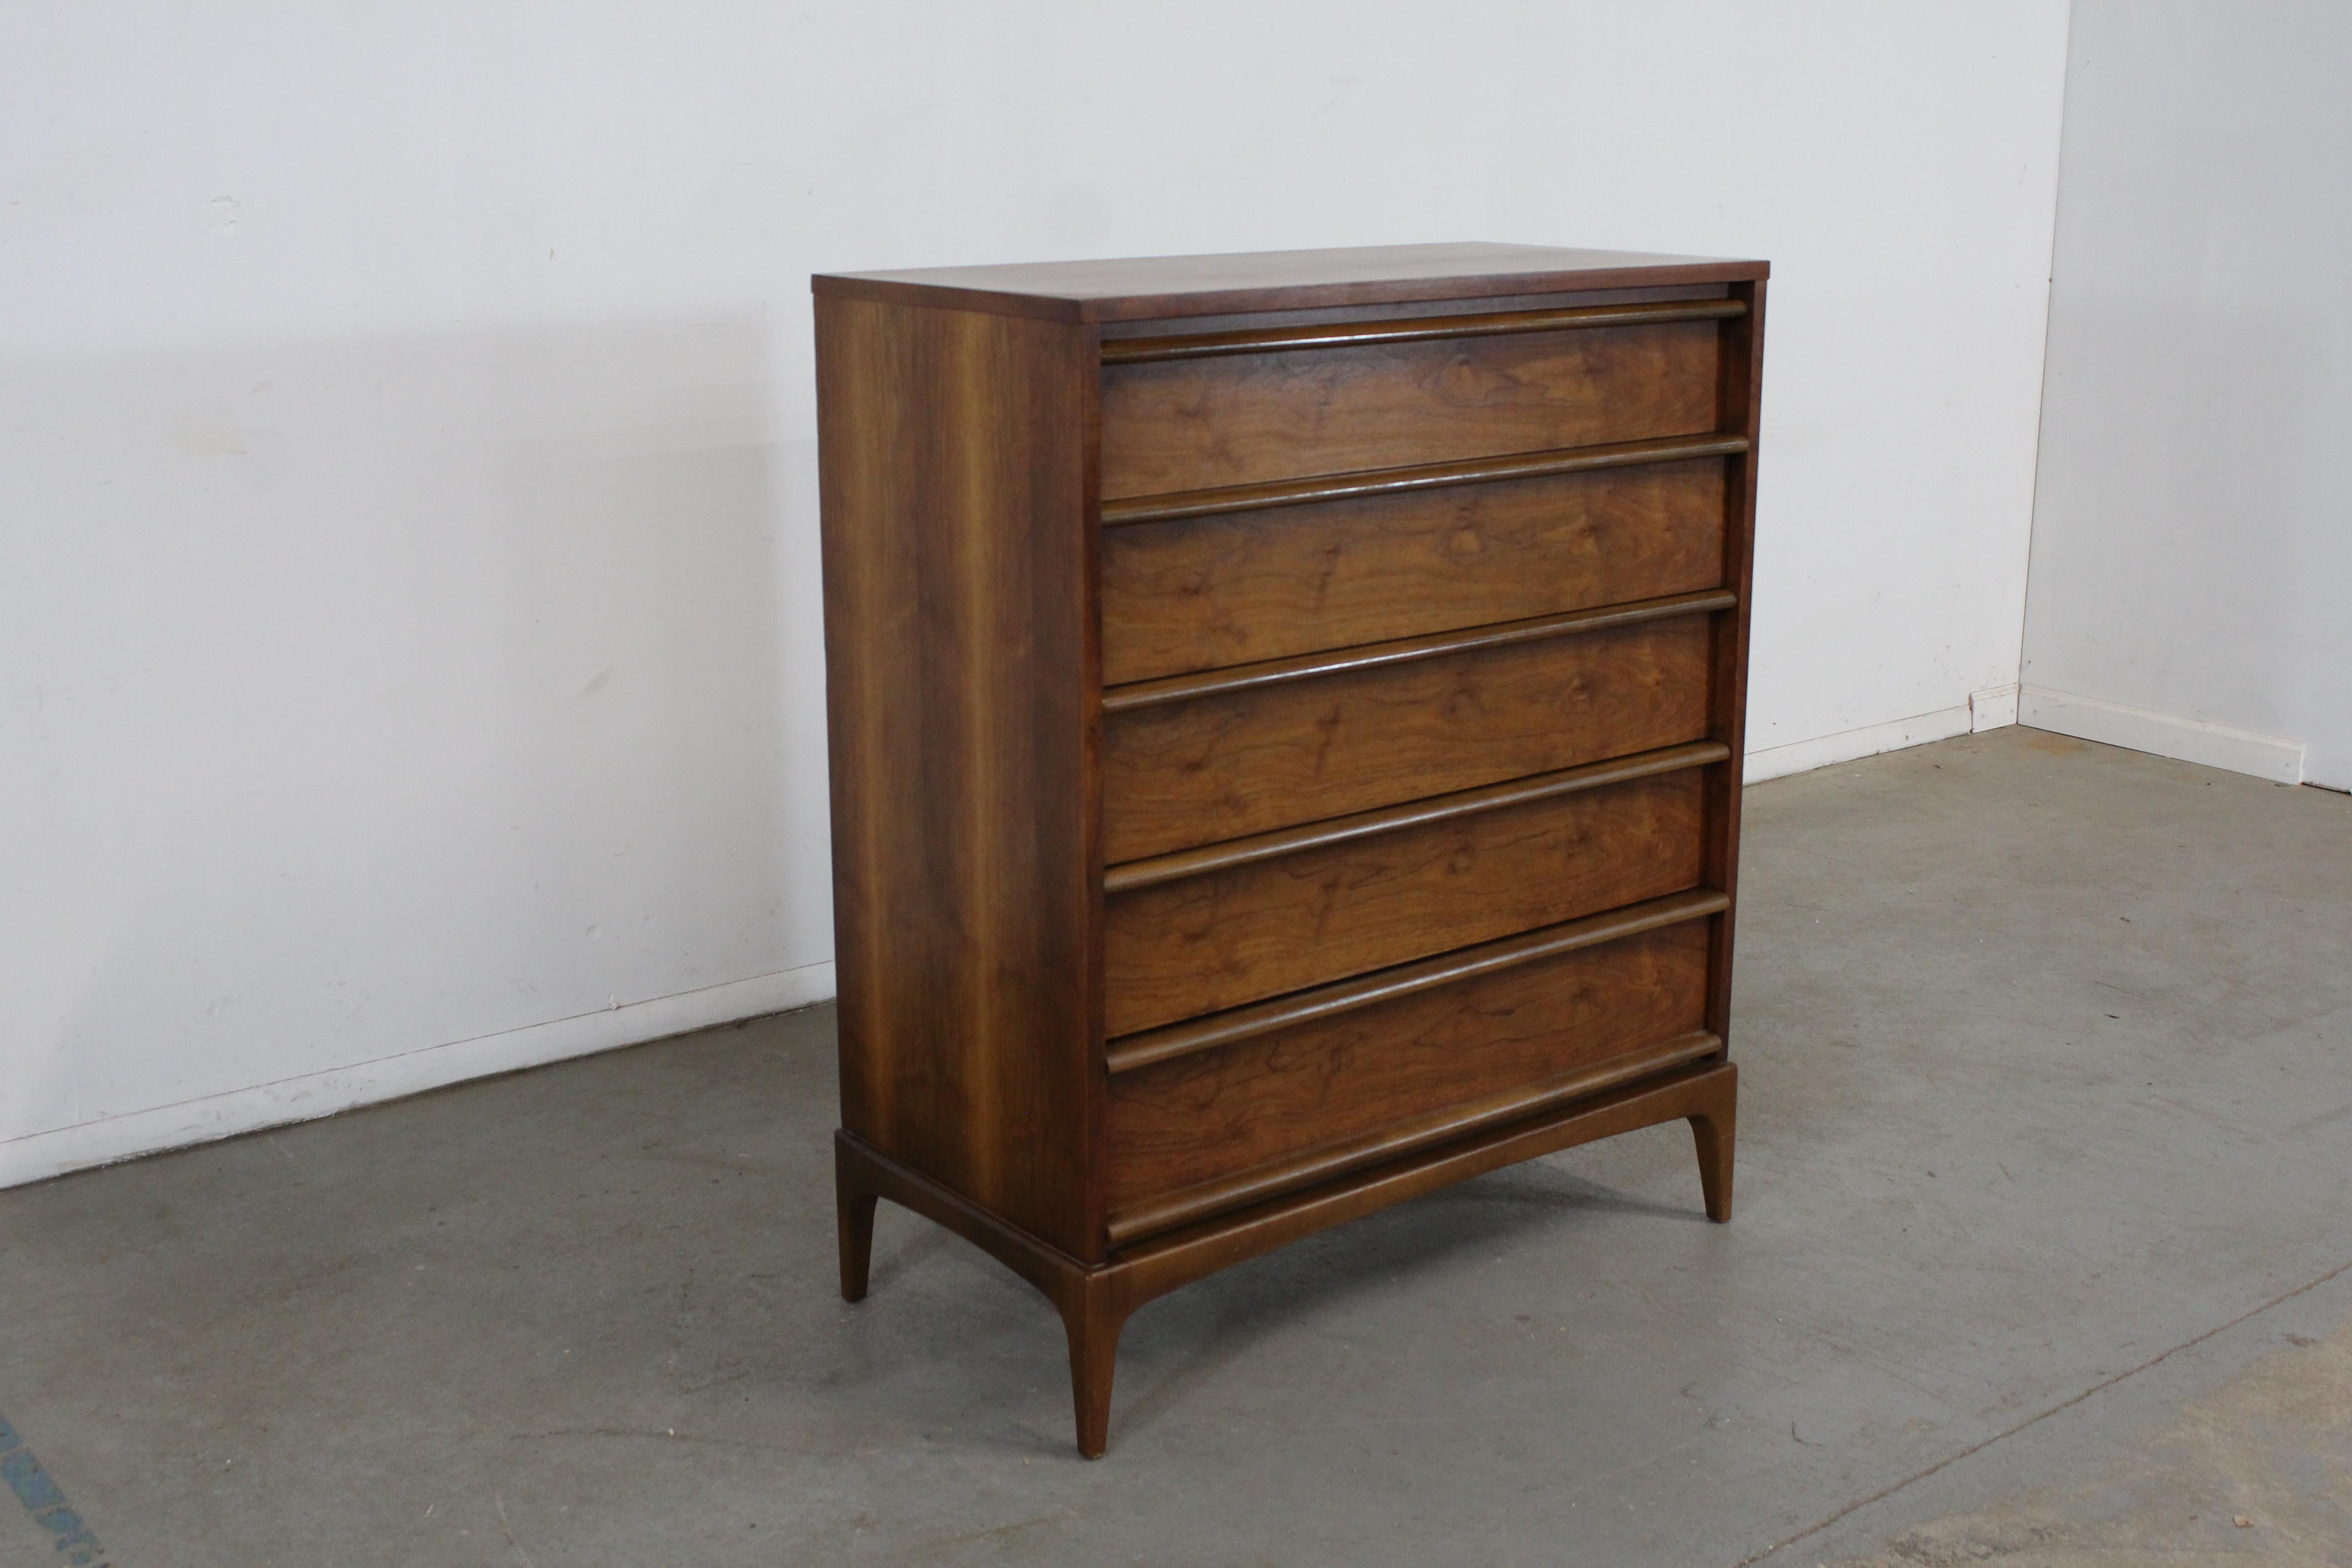 Mid-Century Modern lane rhythm sculptural walnut tall chest

Offered is an excellent example of American mid-century modern design; a walnut dresser by Lane 'Rhythm' from the 1960's. Features dovetailed drawers with tapered legs and sculpted